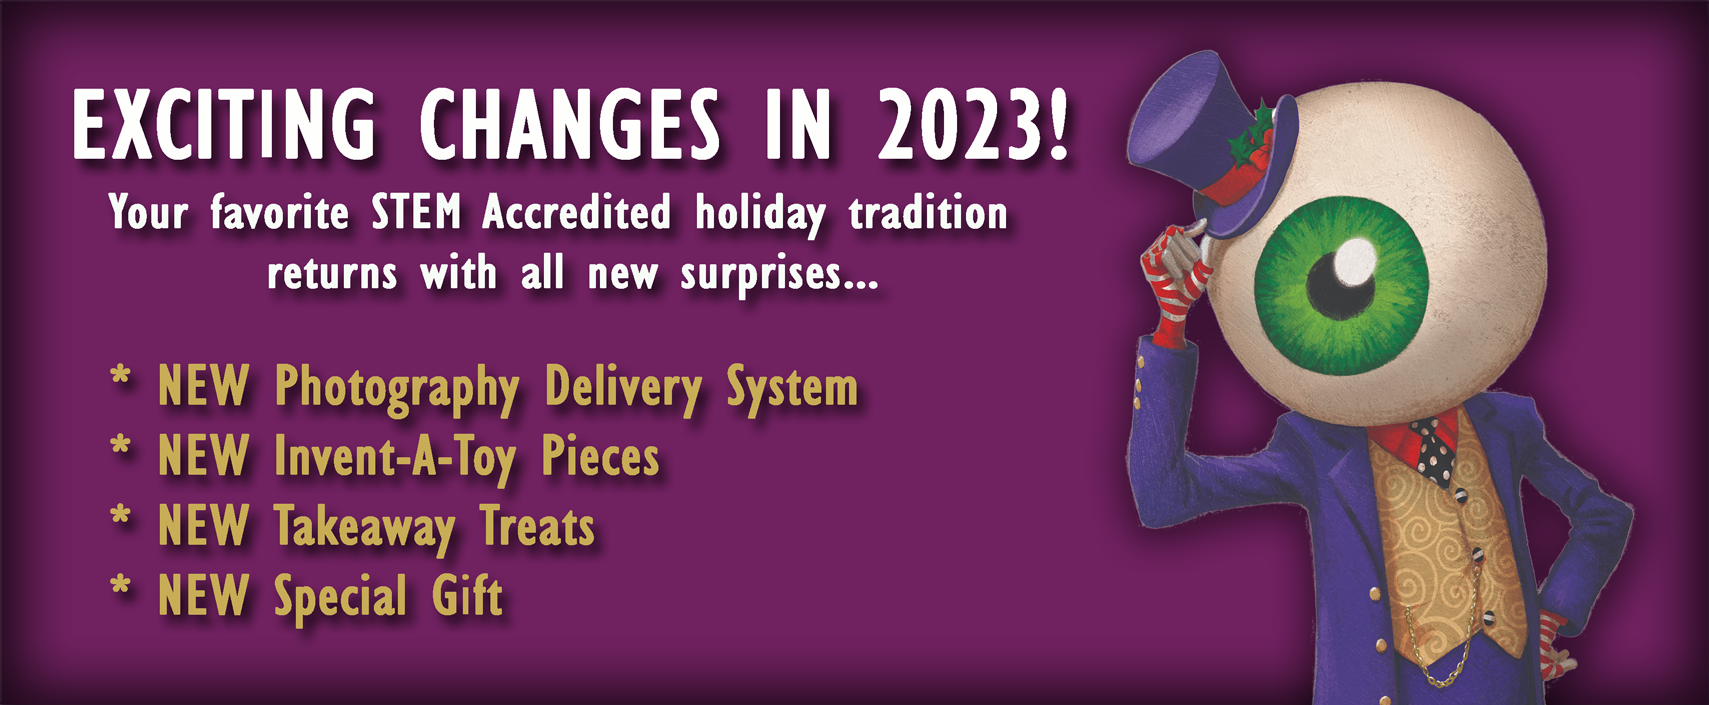 Exciting Chages In 2023!